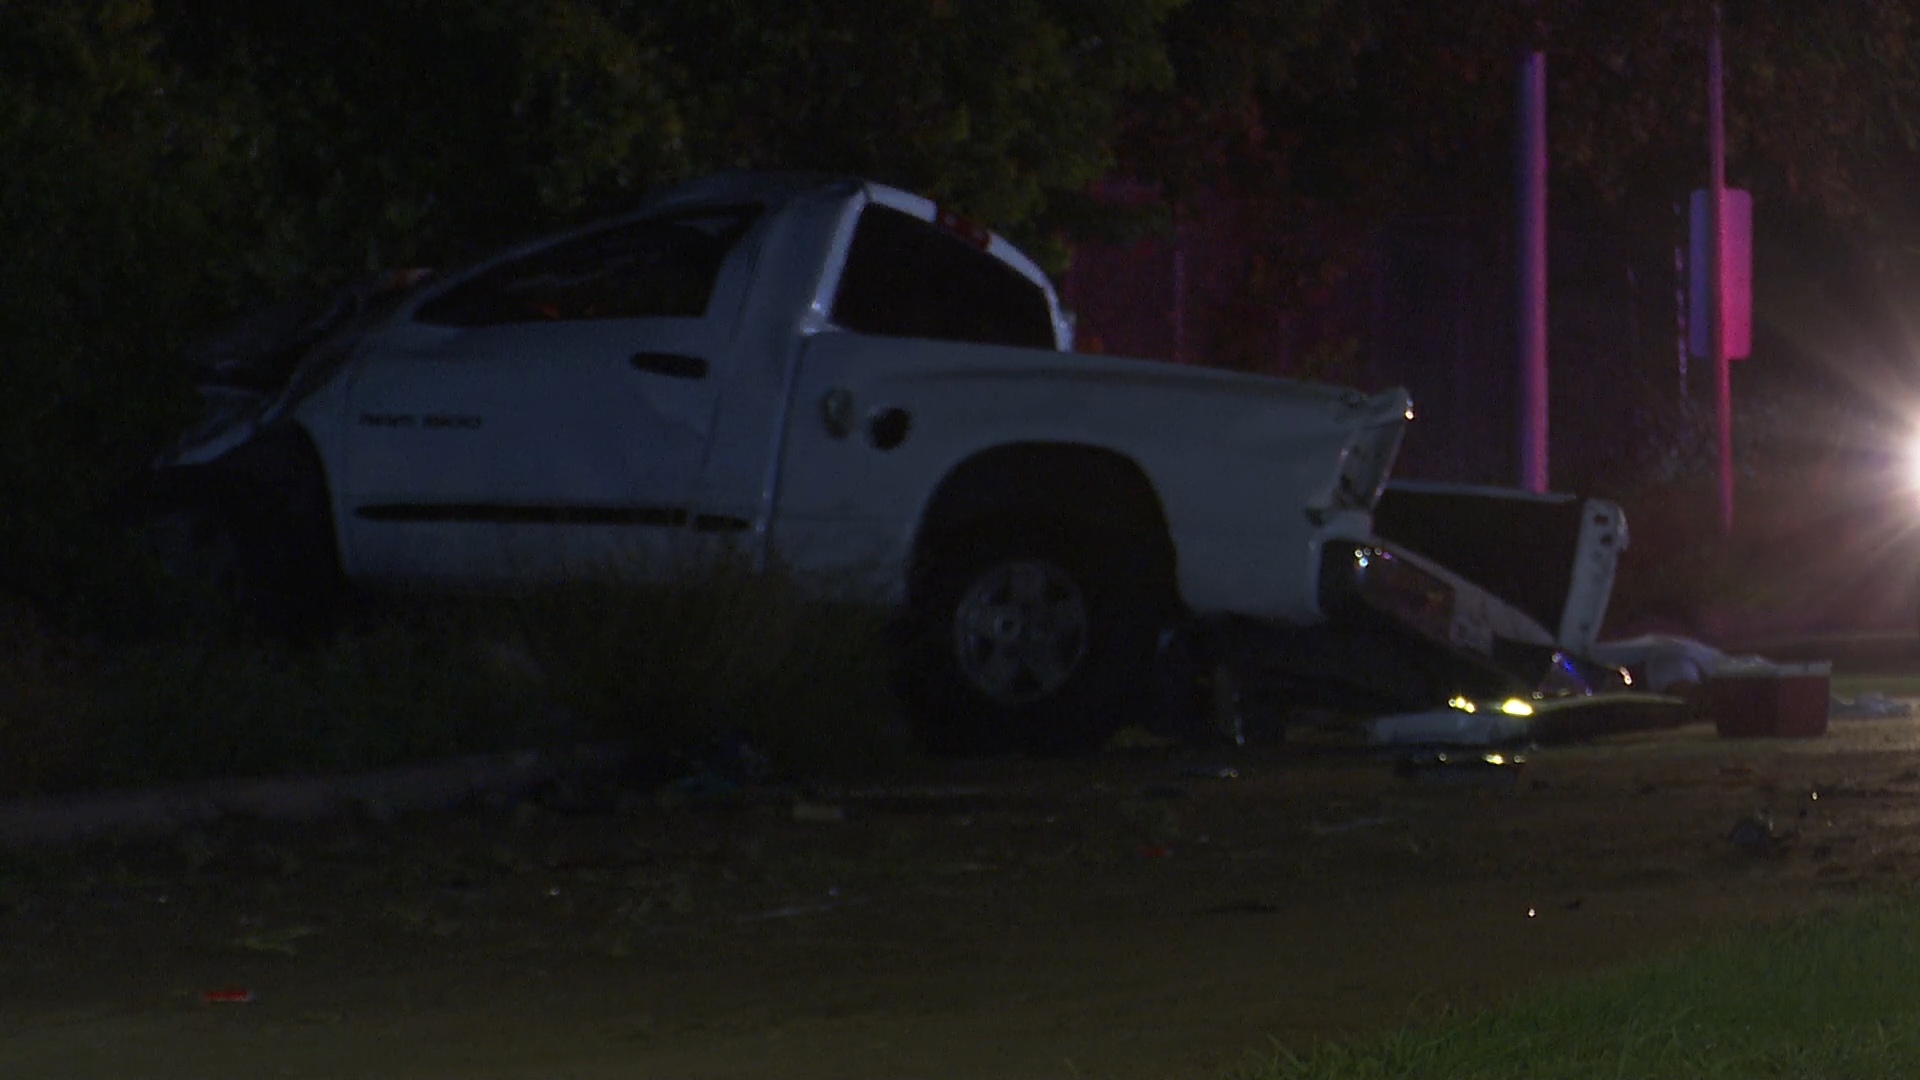 A man died and a woman was hospitalized after a high-speed rollover crash in northwest Houston Sunday night, according to the Houston Police Department.